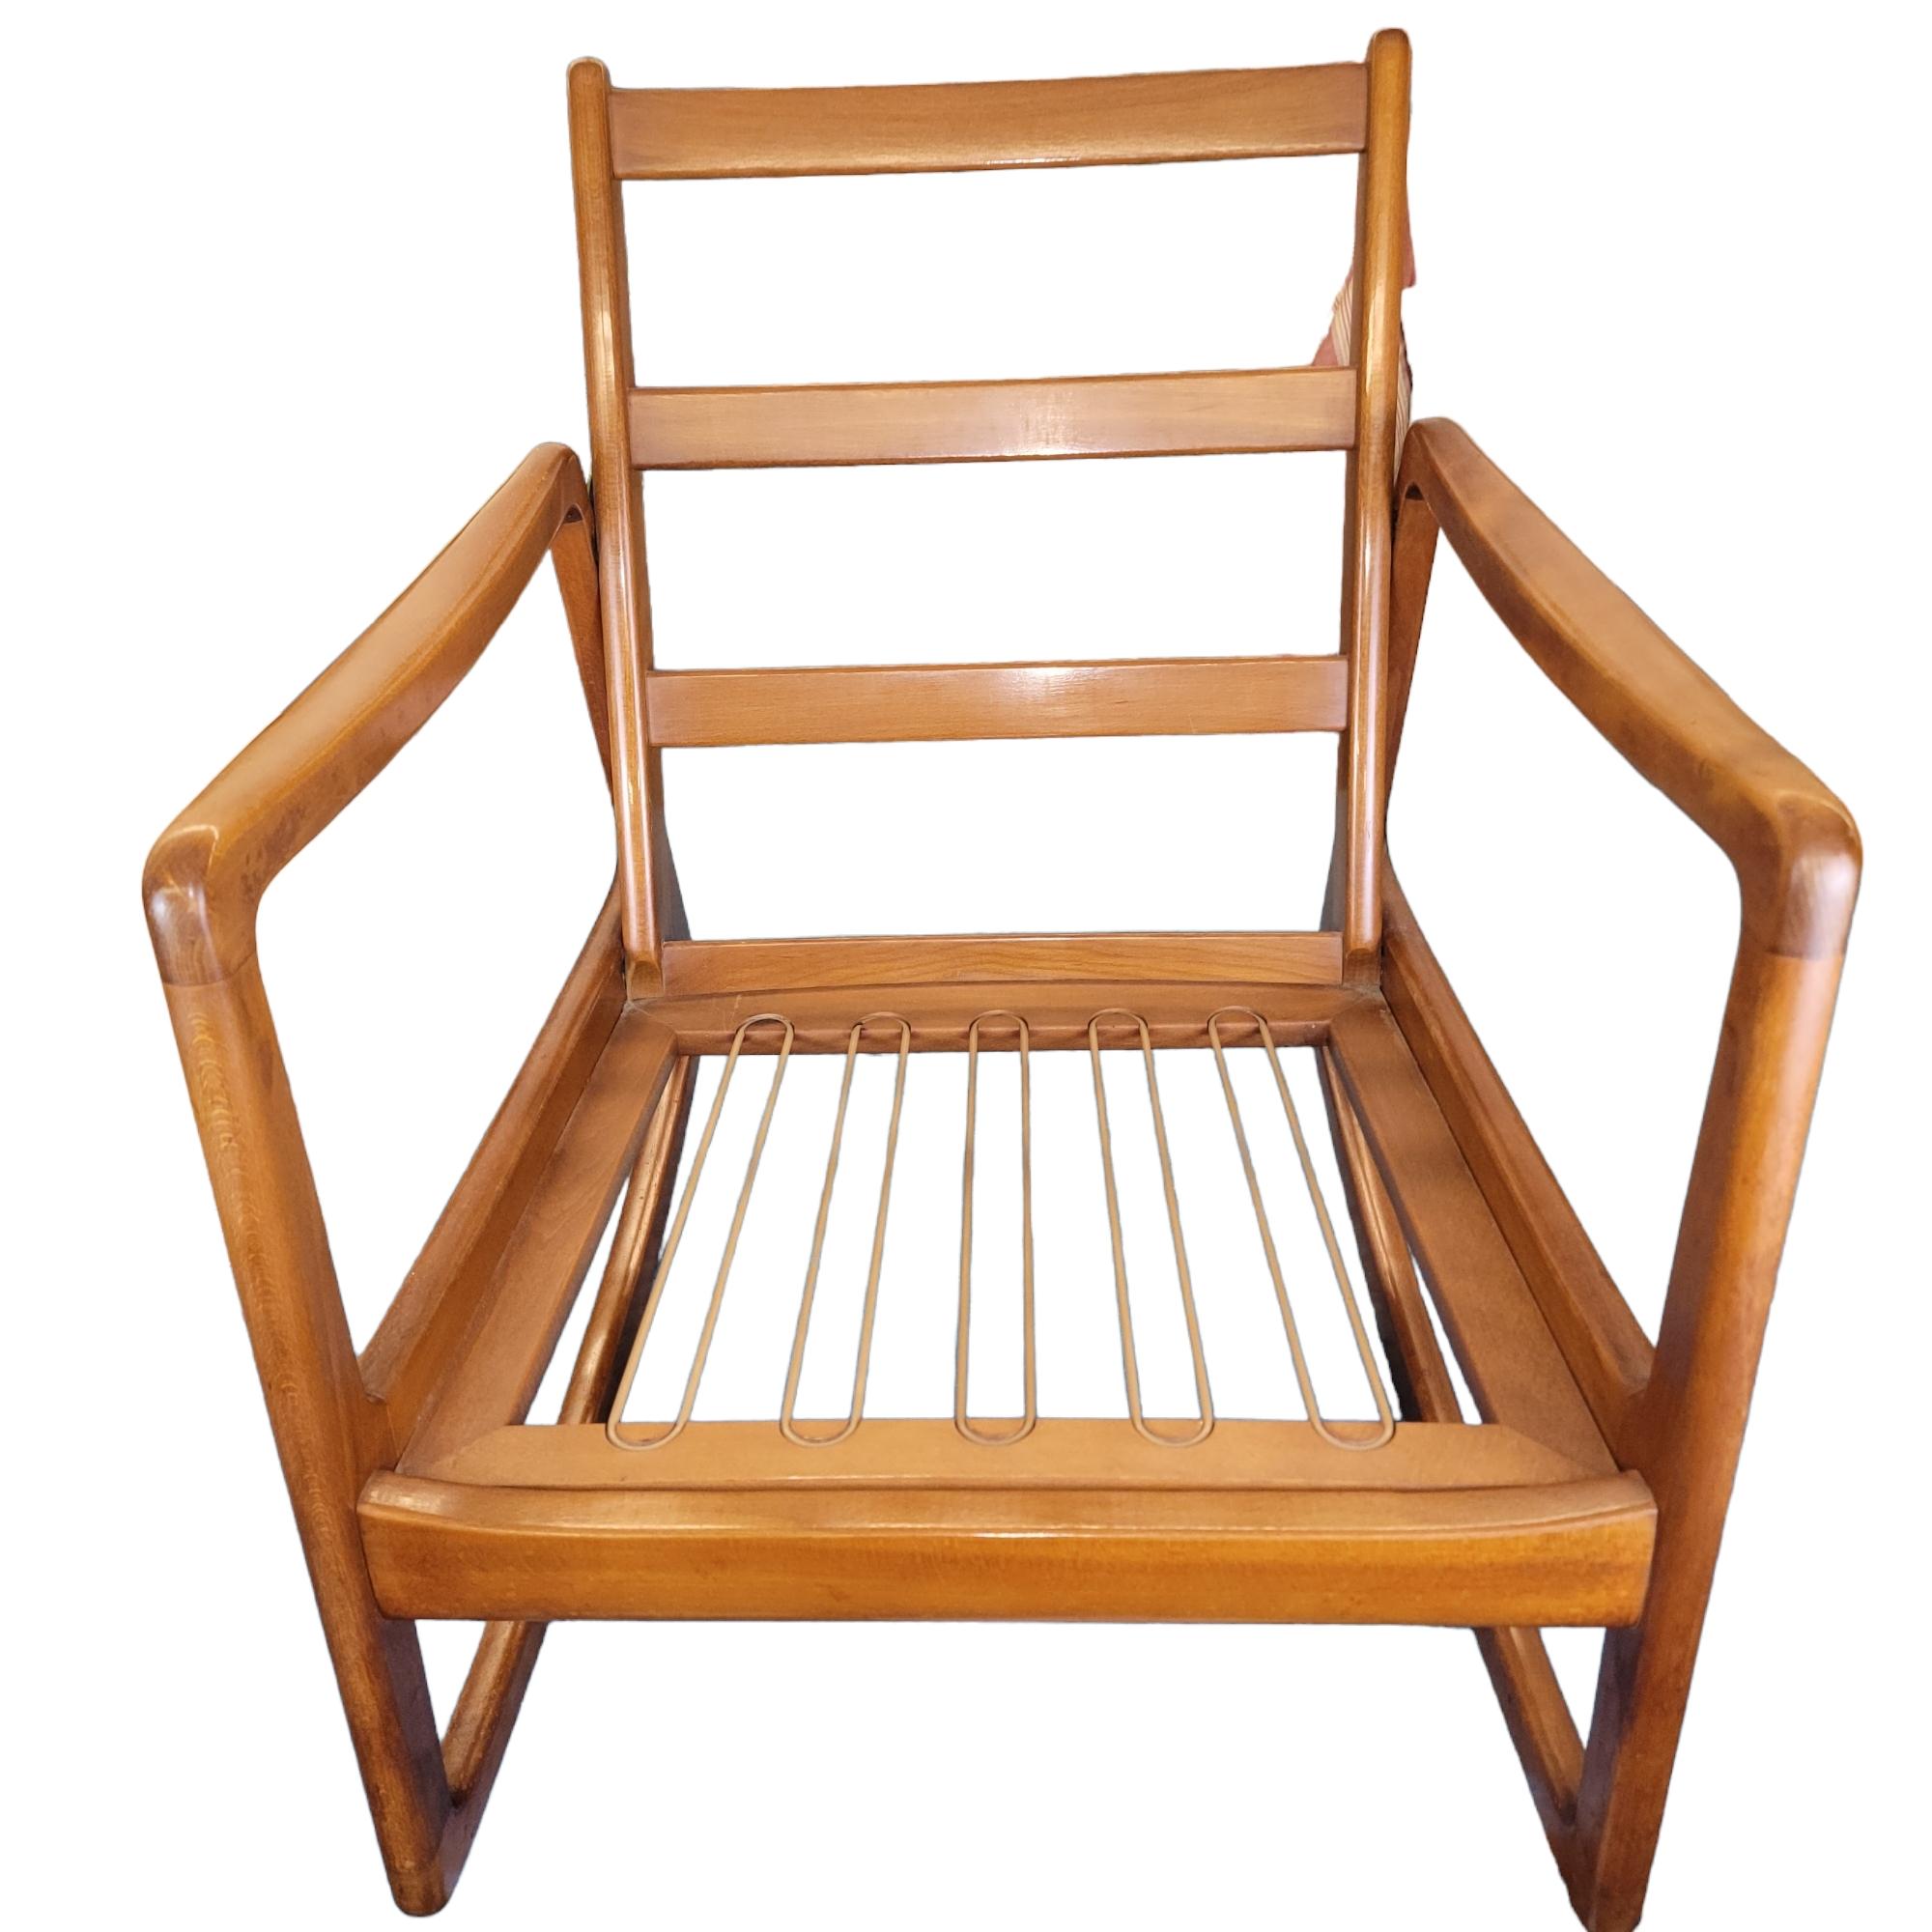 A warm-brown vintage rocker by Danish furniture designer Ole Wanscher, manufactured by France & Søn, in very good condition. The frame is made of hand carved beechwood and the chair cushions are constructed using coil springs, providing a high level